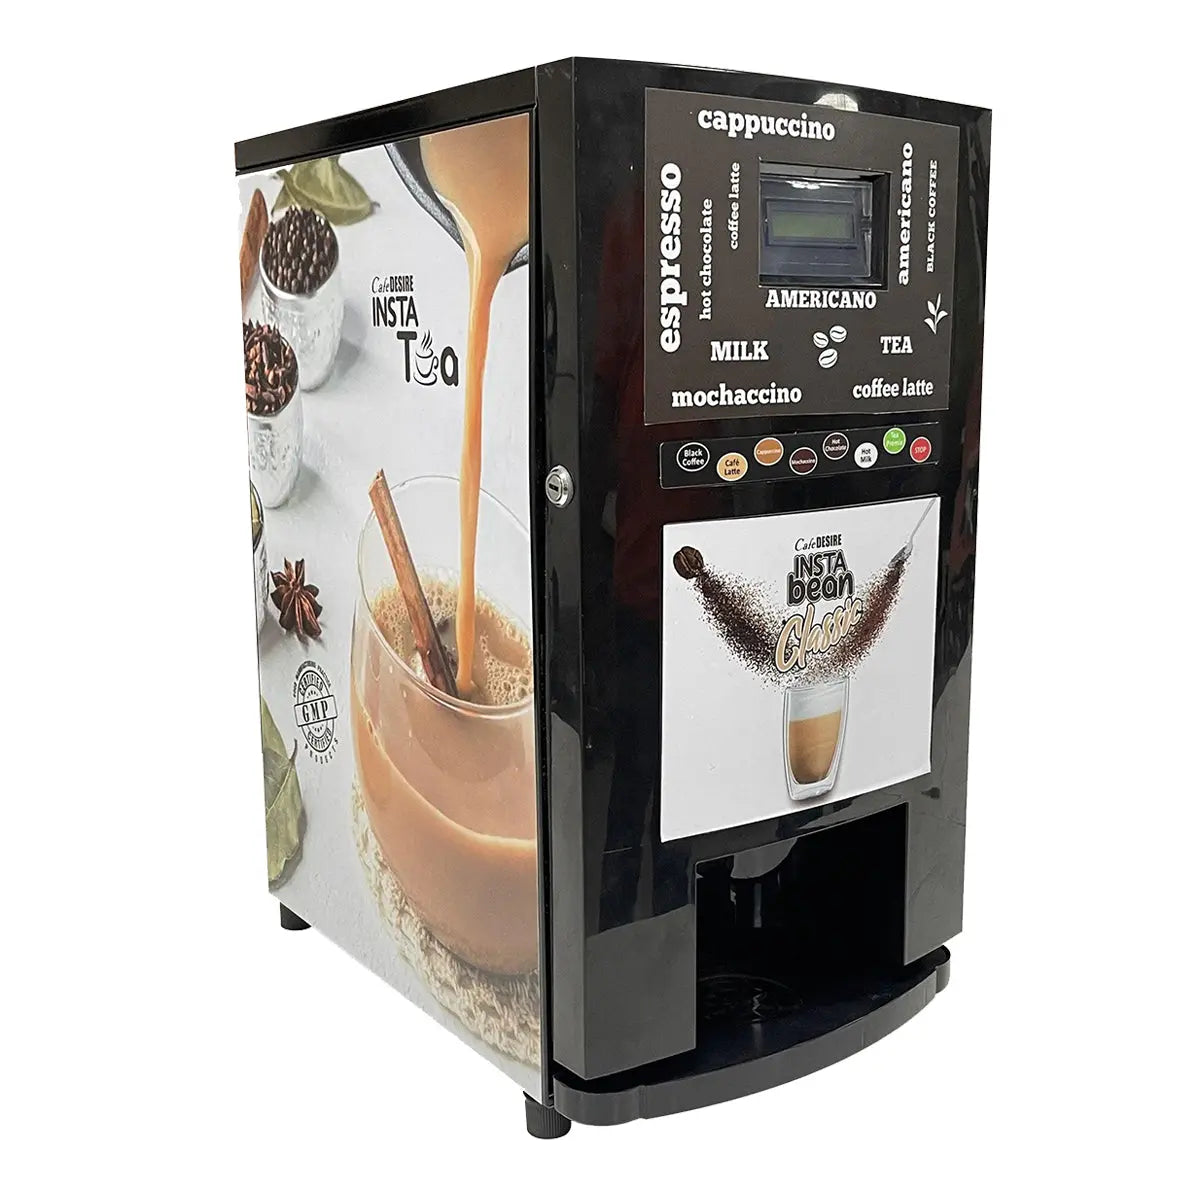 Insta Bean Classic Coffee Vending Machine | 8 Options | Espresso Black Coffee, Coffee Latte, Cappuccino, Mochaccino, Hot Chocolate, Hot Milk, Instant Tea, Instant Coffee | For Smart Offices, Shops, Hotels, Restaurants and Home - cafedesireonline.com